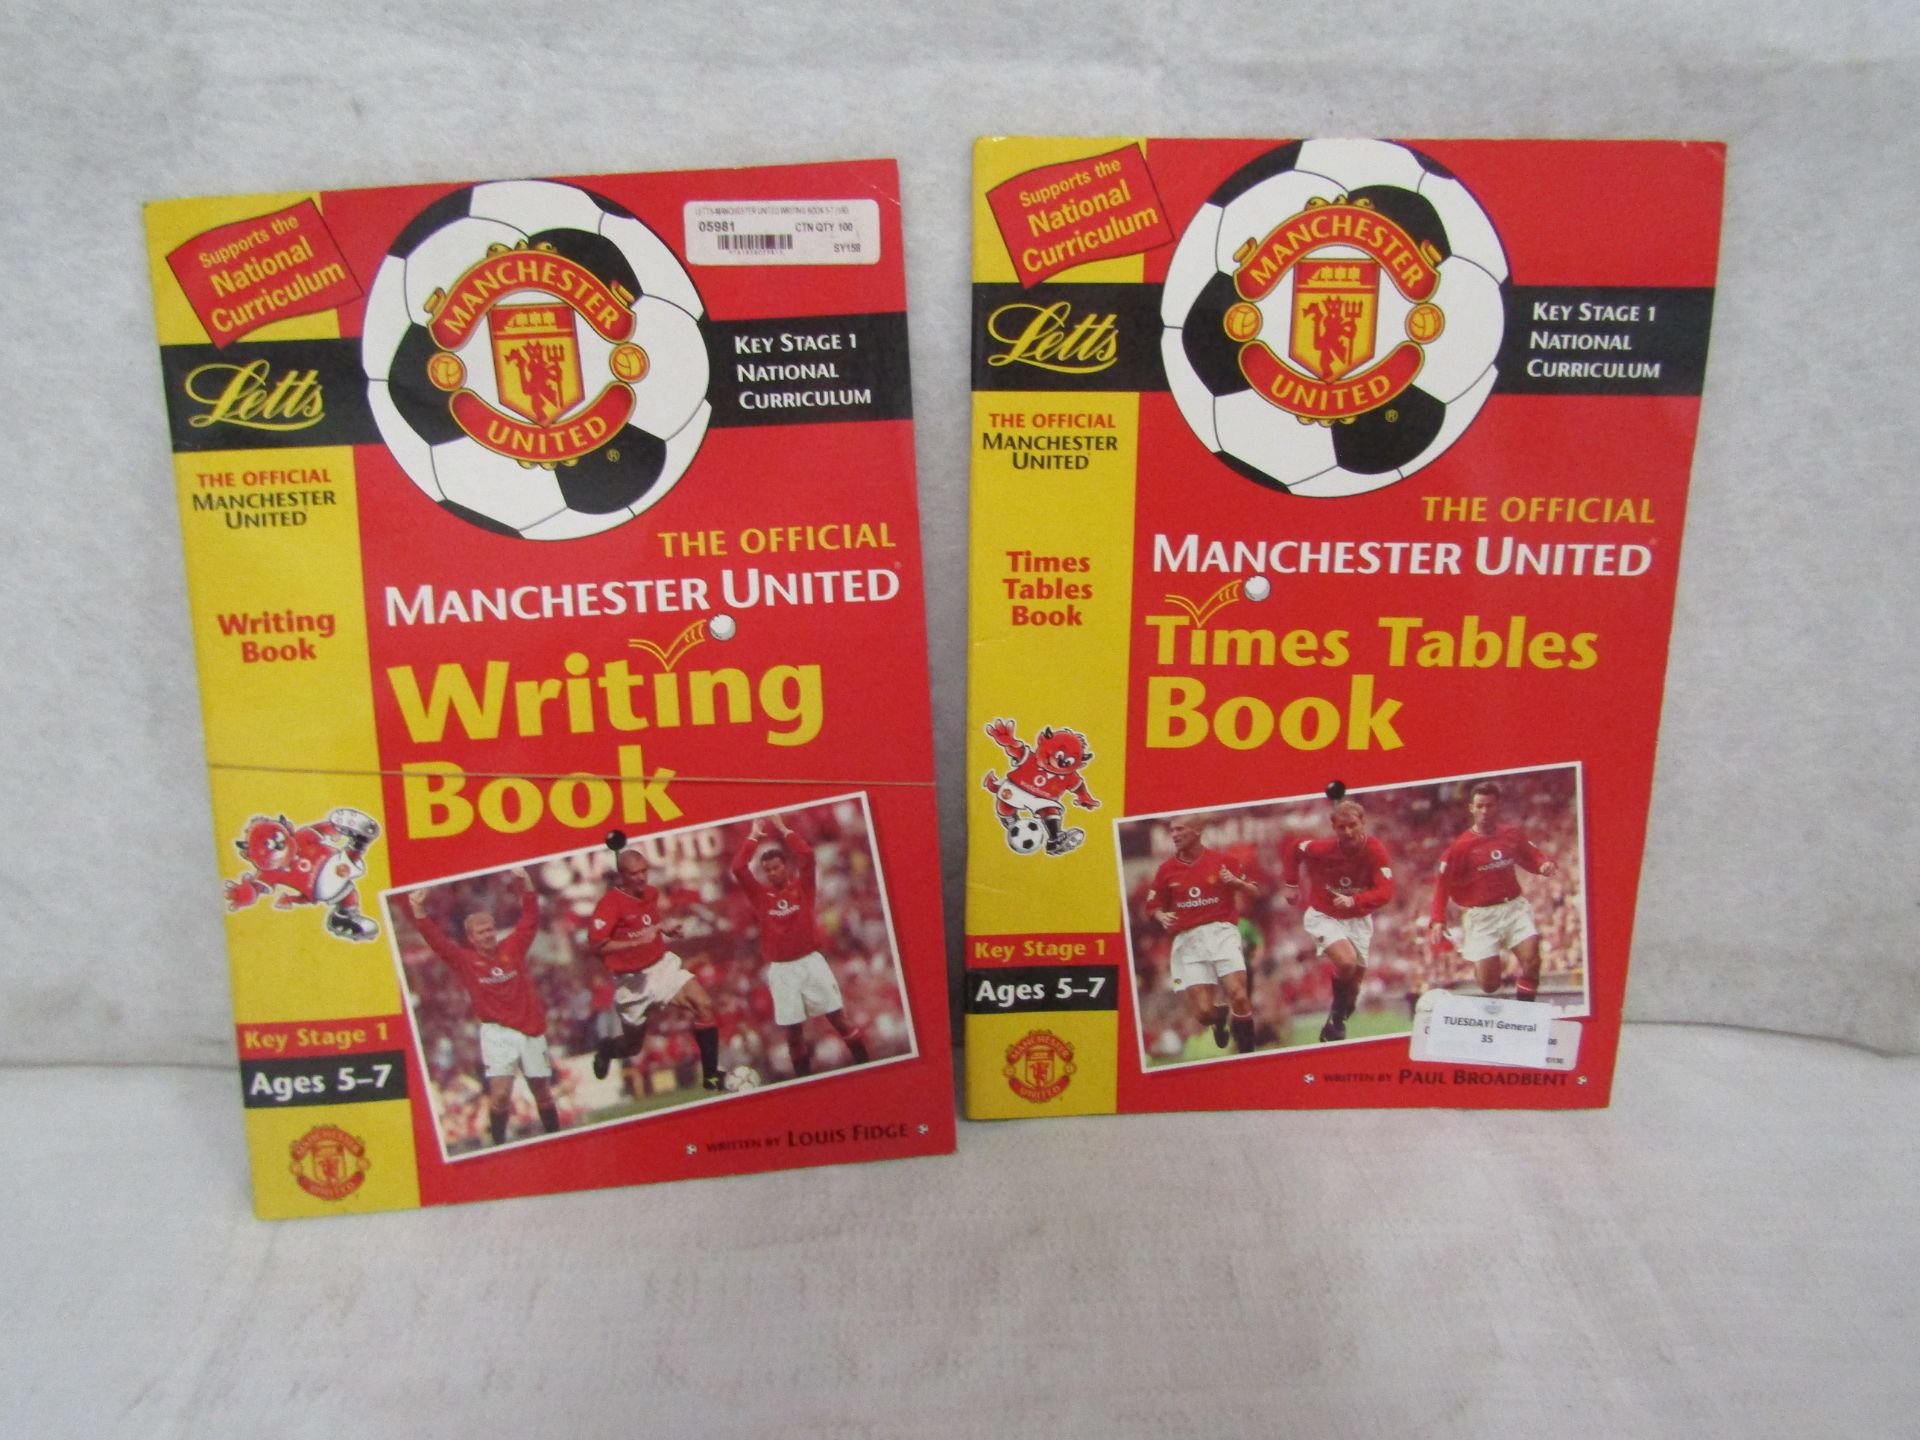 2X Letts - Manchester United Times Table Books ( Key Stage 1 ) - Unused.